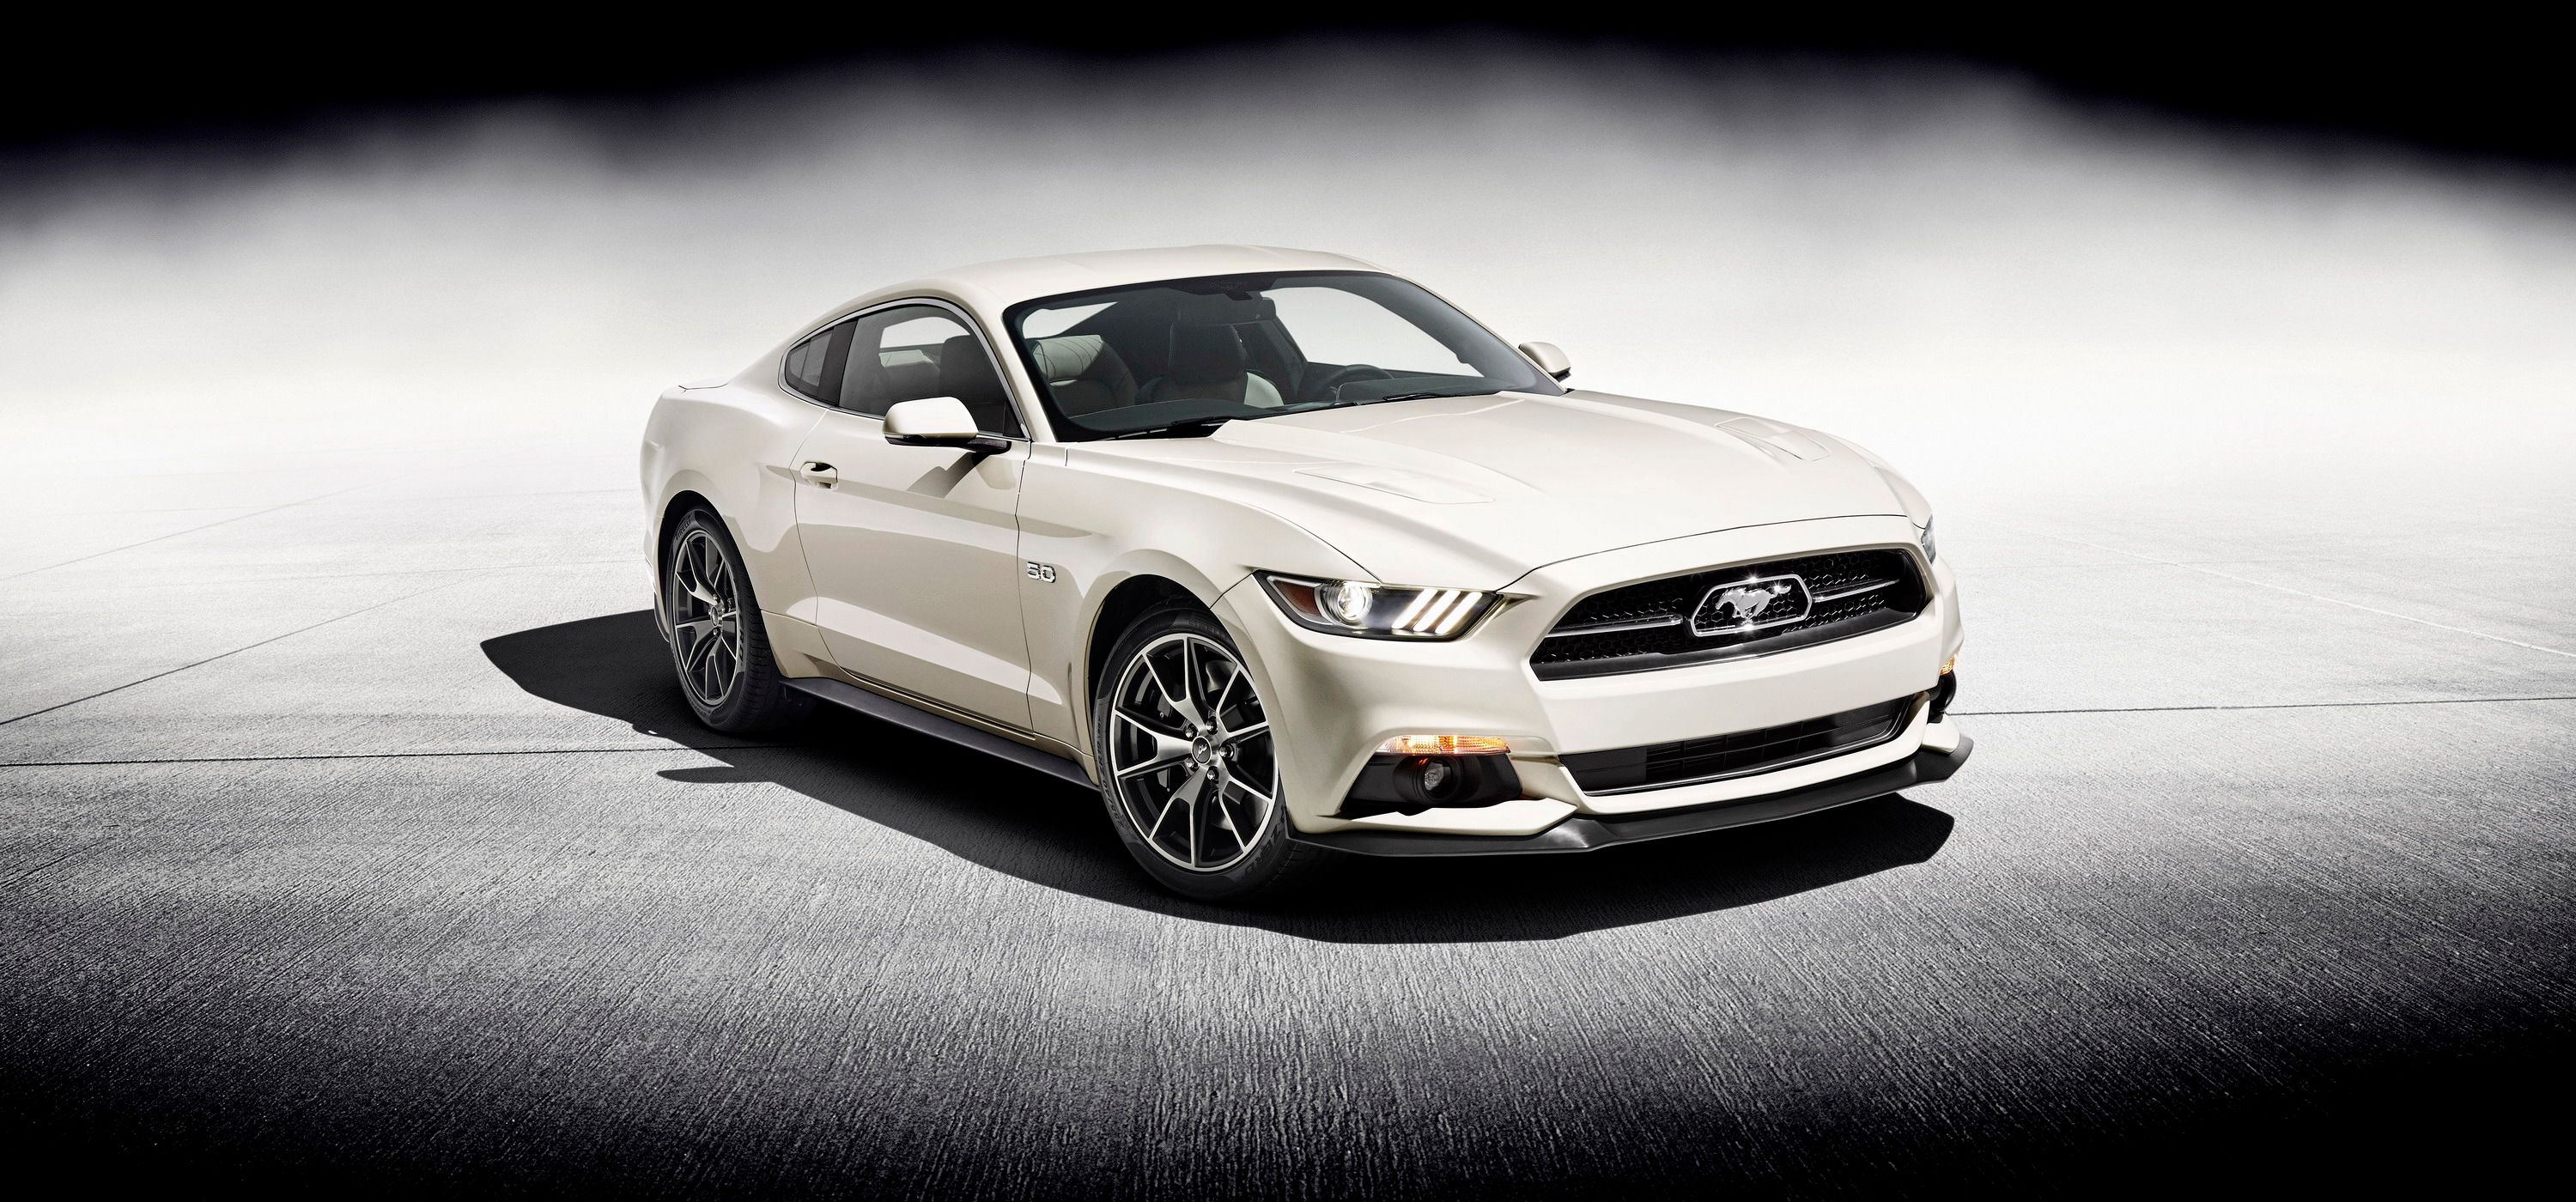  The Mustang 50 Years Limited Edition just sold at action for more than four times its MSRP. 